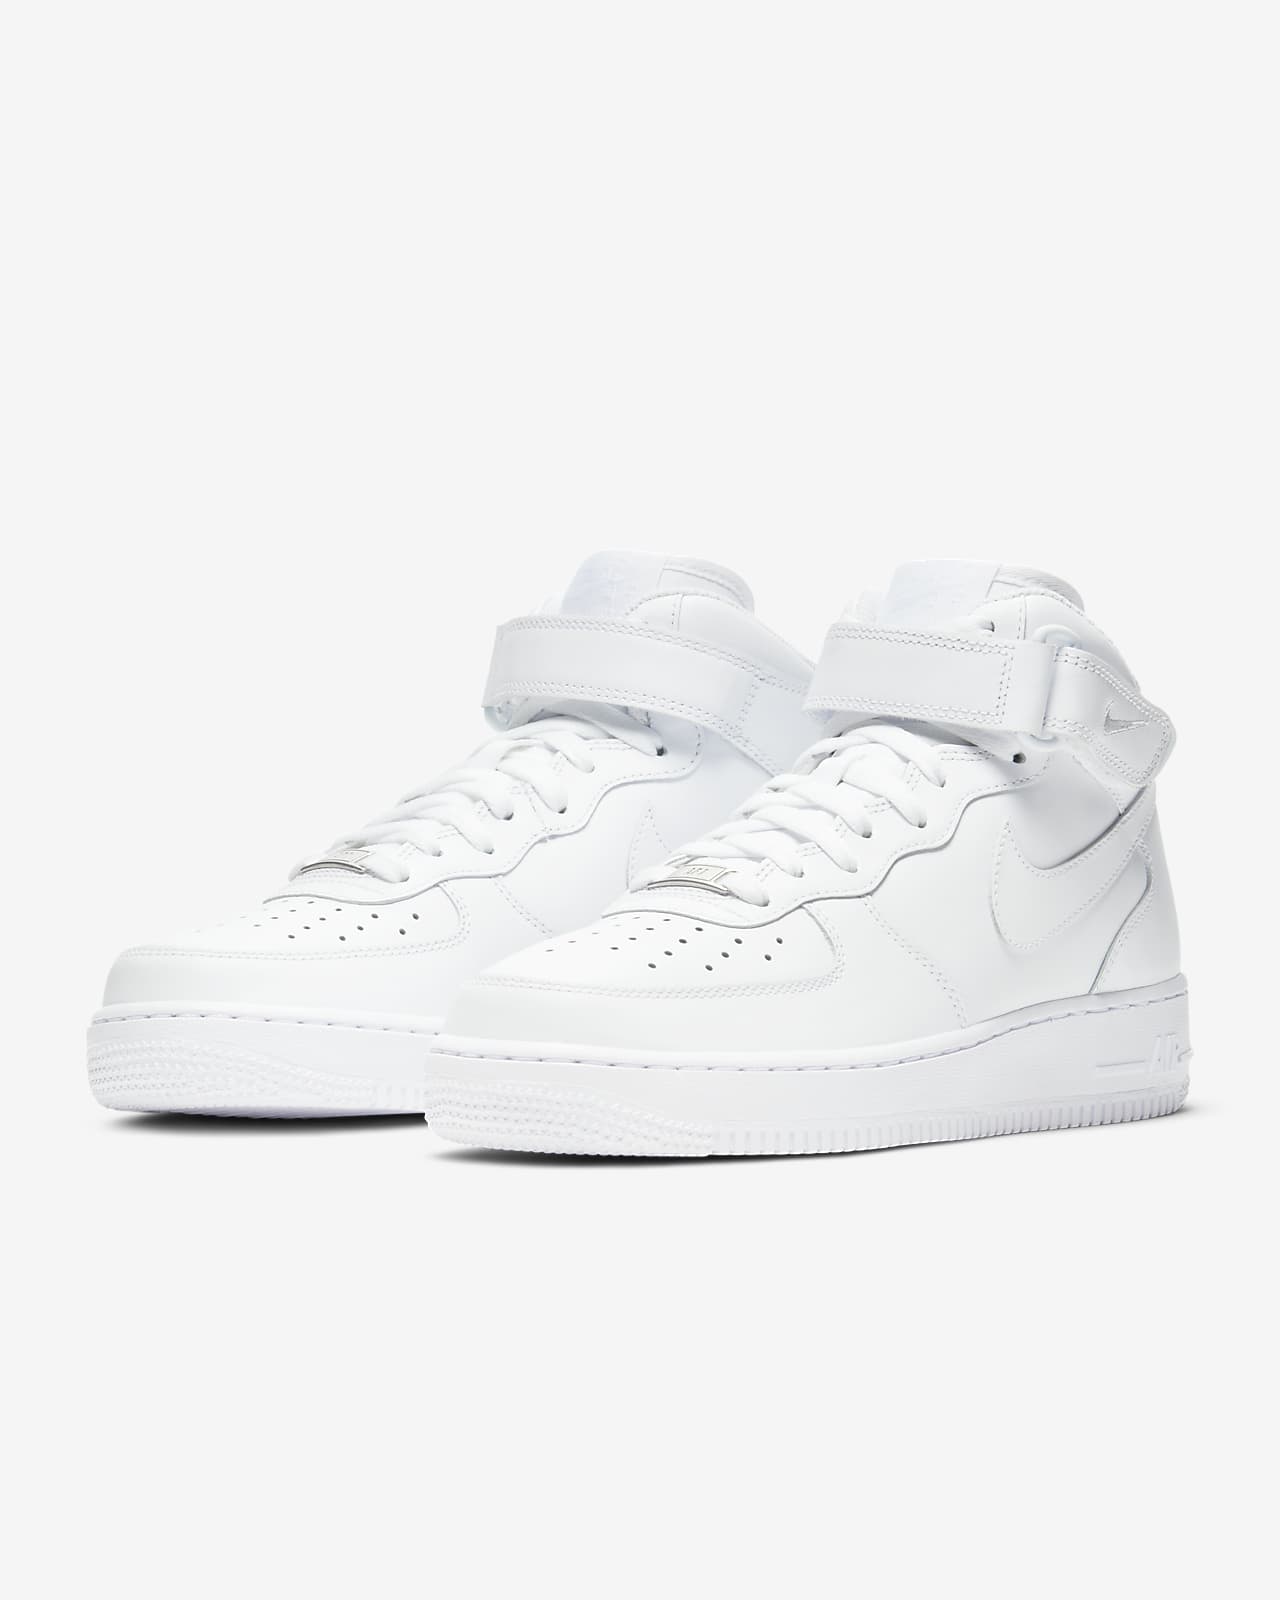 NIKE WMNS AIR FORCE 1 '07 MID WHITE ナイキ